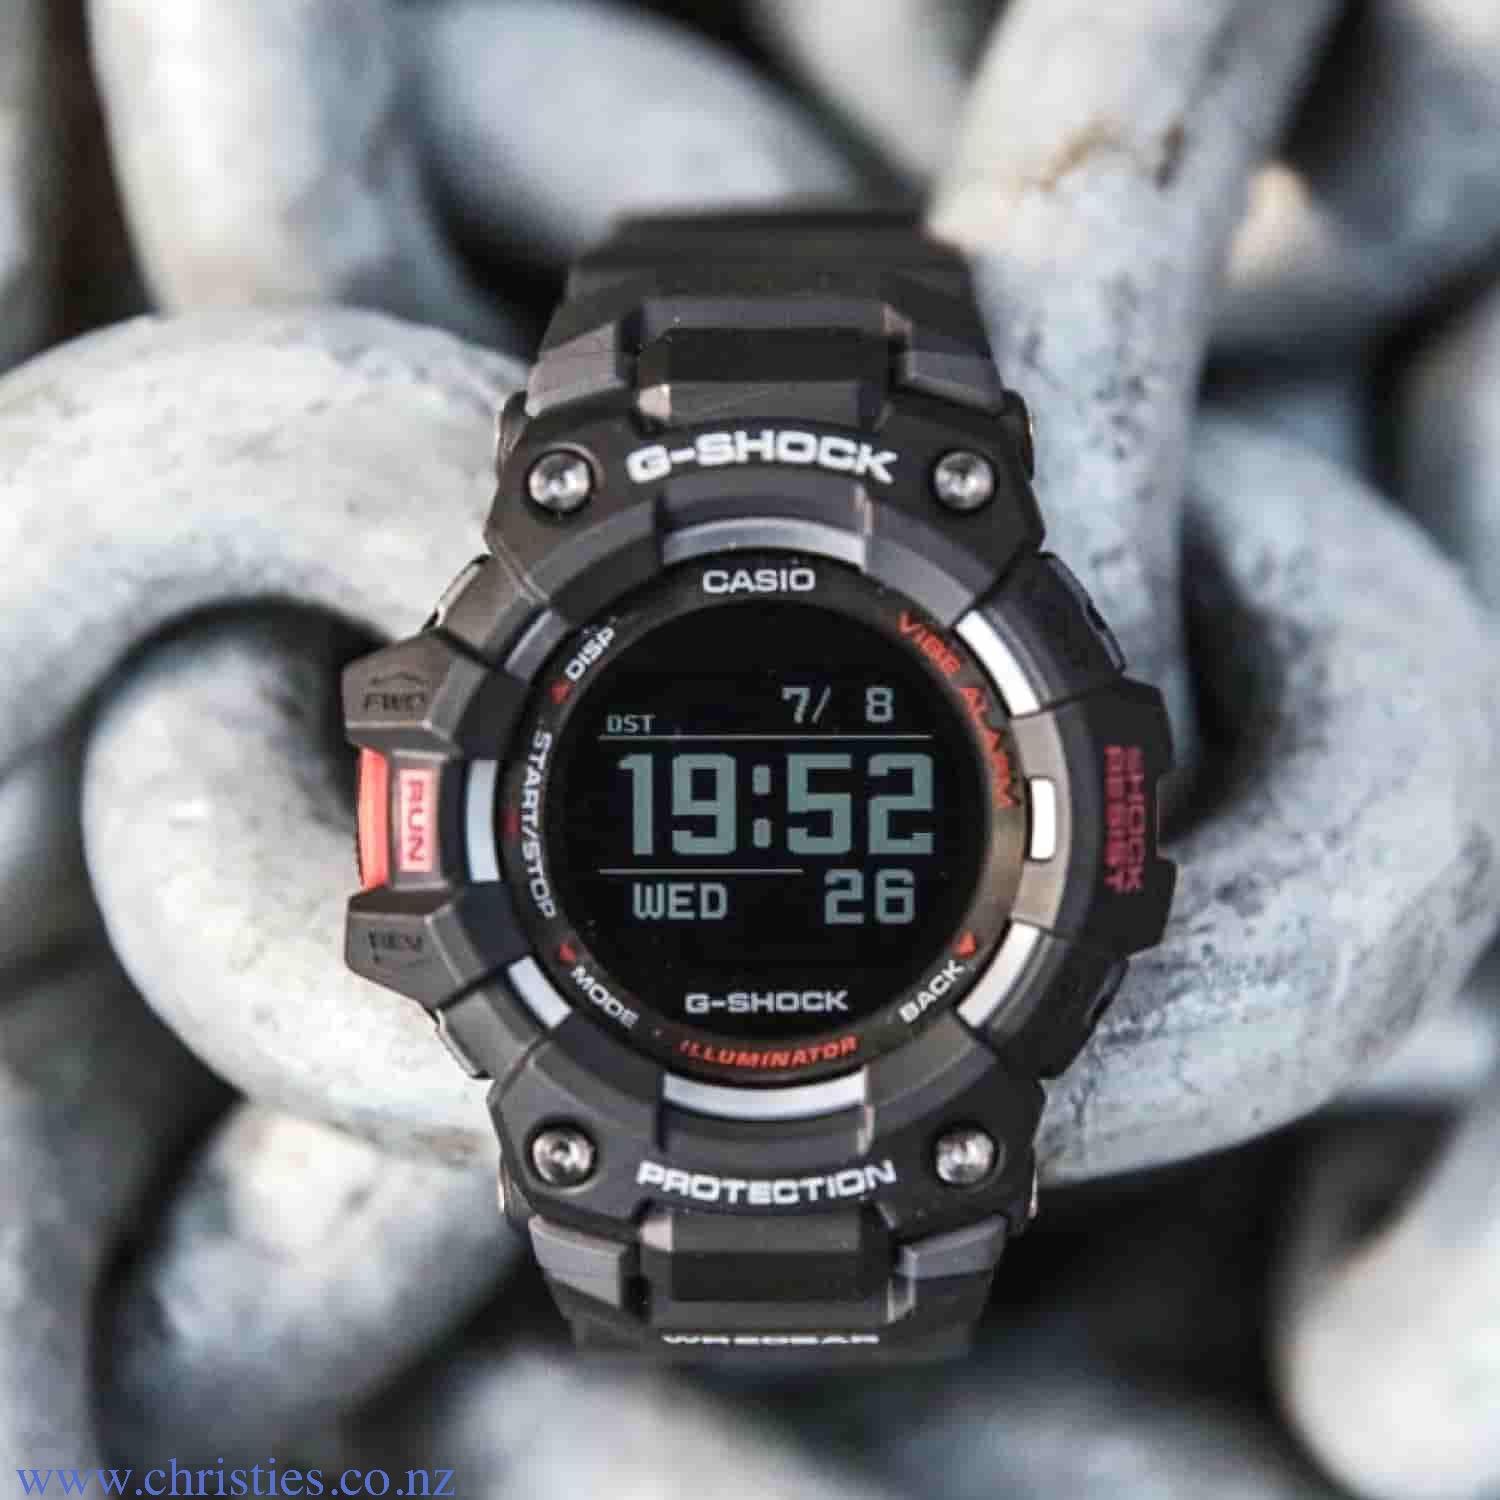 GBD100-1 G-Shock G-SQUAD Sports Watch. These are the latest additions to the G-SQUAD lineup of sports watches from G-SHOCK, now with Bluetooth® capabilities that allow continuous connection with a smartphone. These watches can link with the GPS of a G-sho